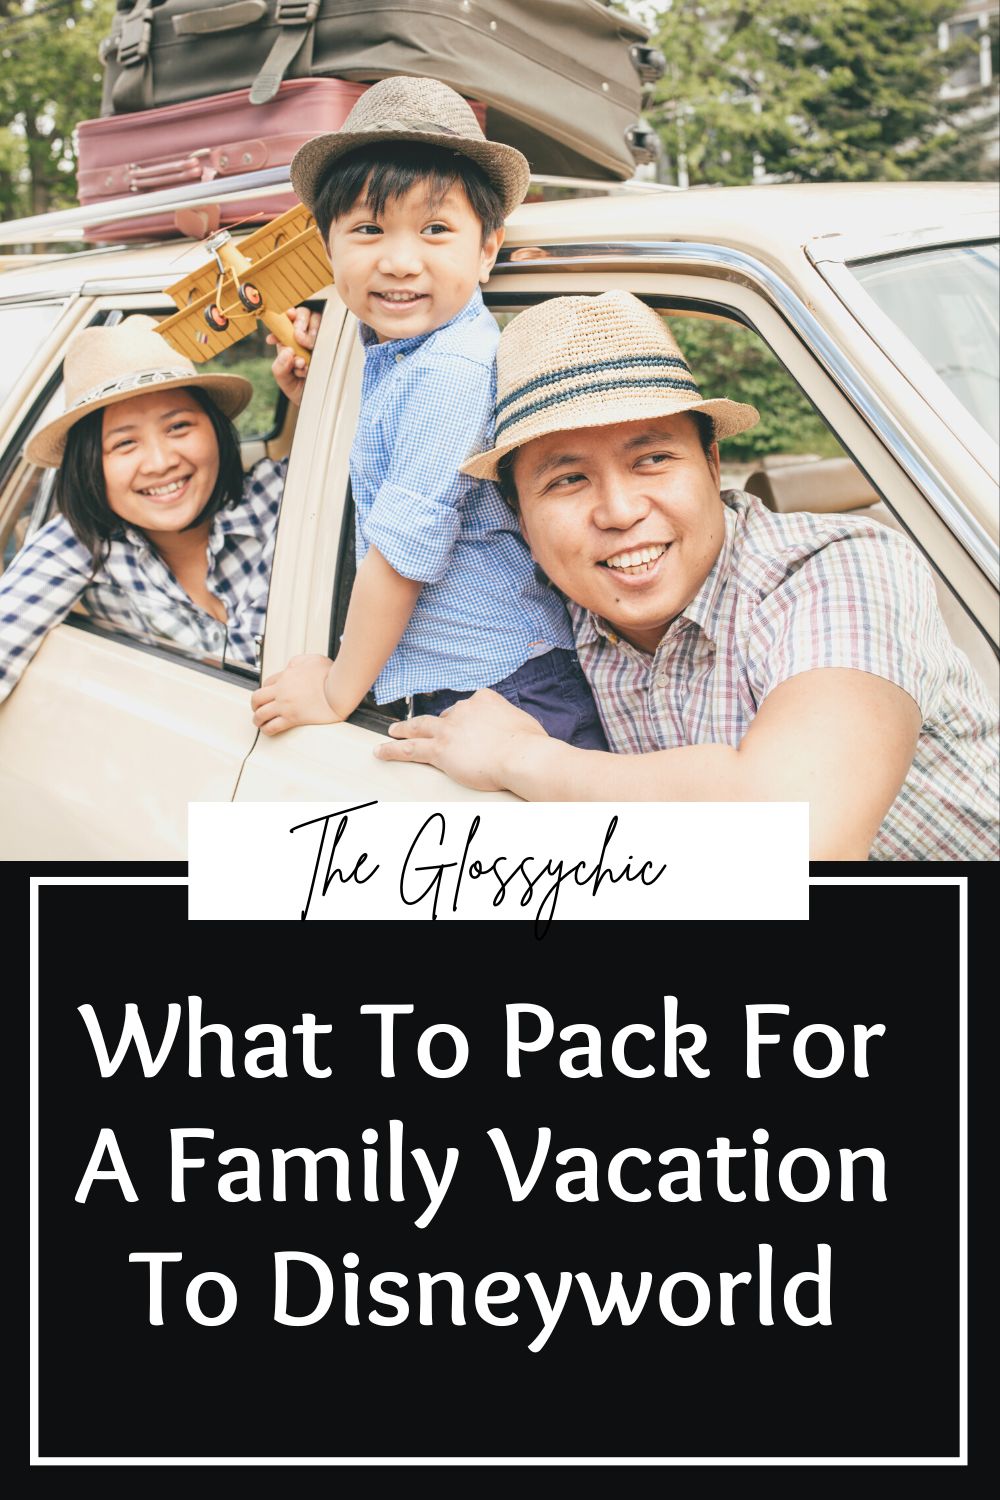 What To Pack For A Family Vacation To Disneyworld